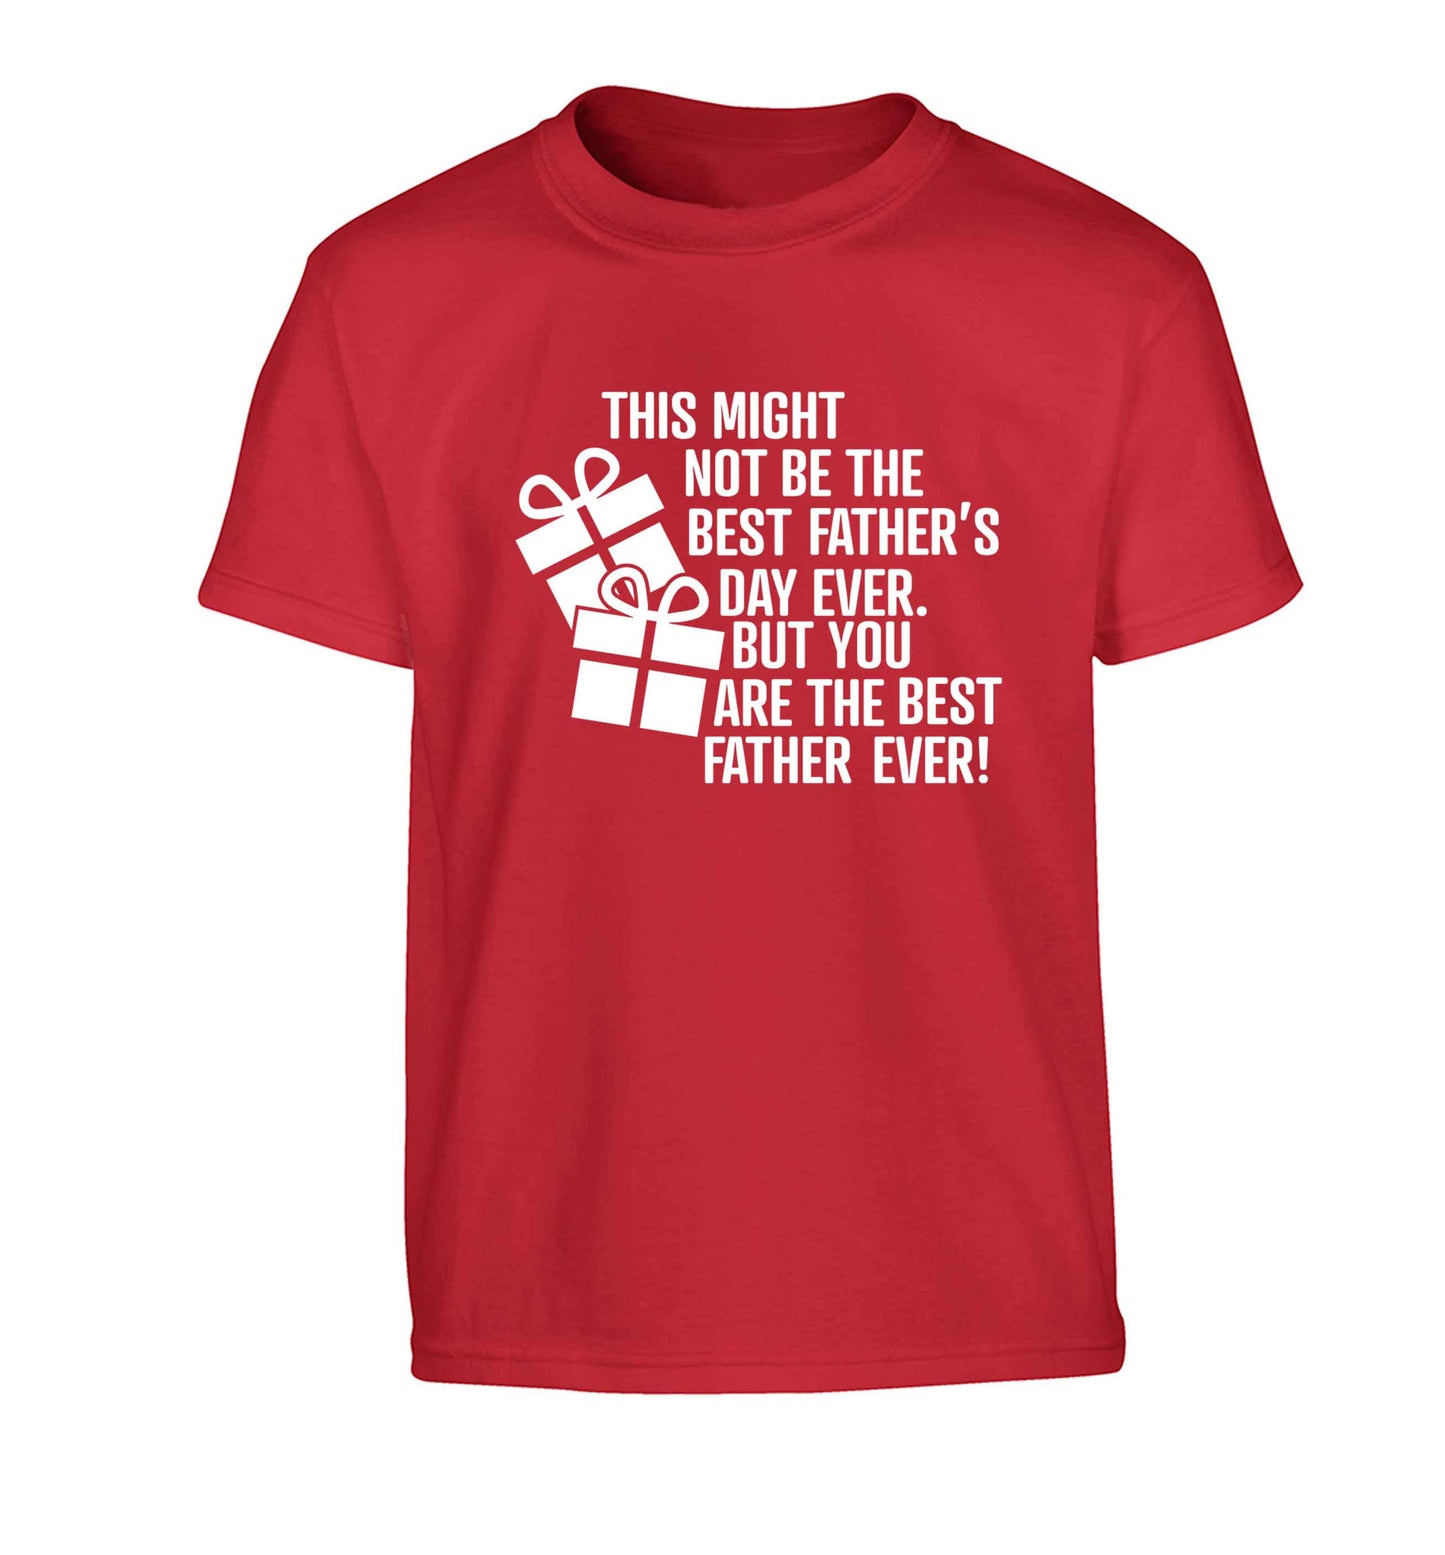 It might not be the best Father's Day ever but you are the best father ever! Children's red Tshirt 12-13 Years